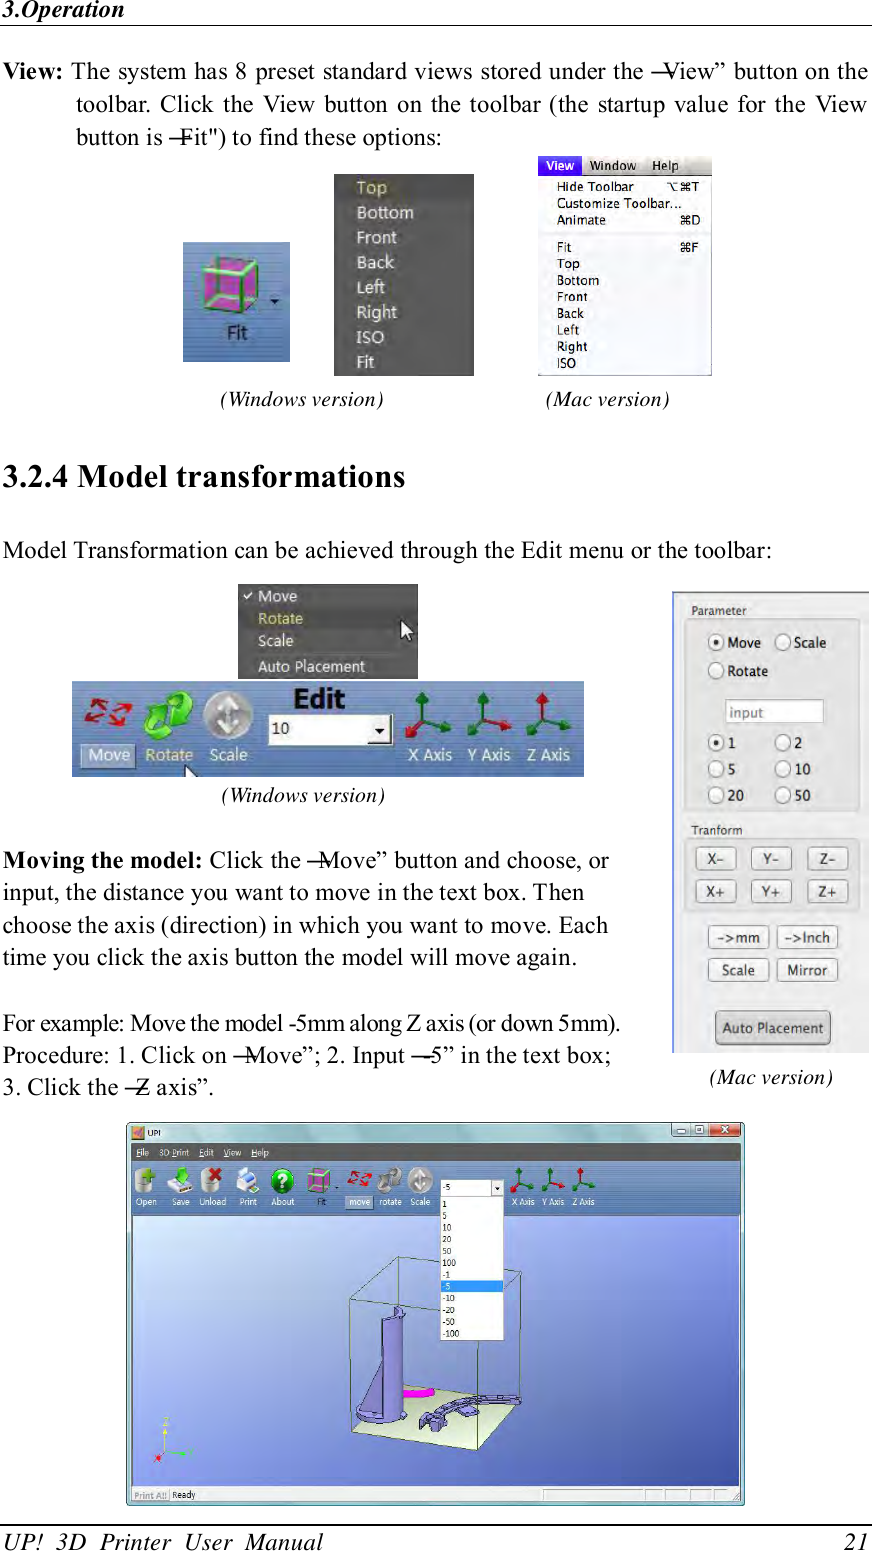 3.Operation UP!  3D  Printer  User  Manual                                21 View: The system has 8 preset standard views stored under the ―View‖ button on the toolbar. Click the View  button  on  the toolbar (the startup value for the  View button is ―Fit&quot;) to find these options:               3.2.4 Model transformations Model Transformation can be achieved through the Edit menu or the toolbar:     (Windows version)  Moving the model: Click the ―Move‖ button and choose, or input, the distance you want to move in the text box. Then choose the axis (direction) in which you want to move. Each time you click the axis button the model will move again.  For example: Move the model -5mm along Z axis (or down 5mm).   Procedure: 1. Click on ―Move‖; 2. Input ―-5‖ in the text box; 3. Click the ―Z axis‖.  (Windows version) (Mac version) (Mac version) 